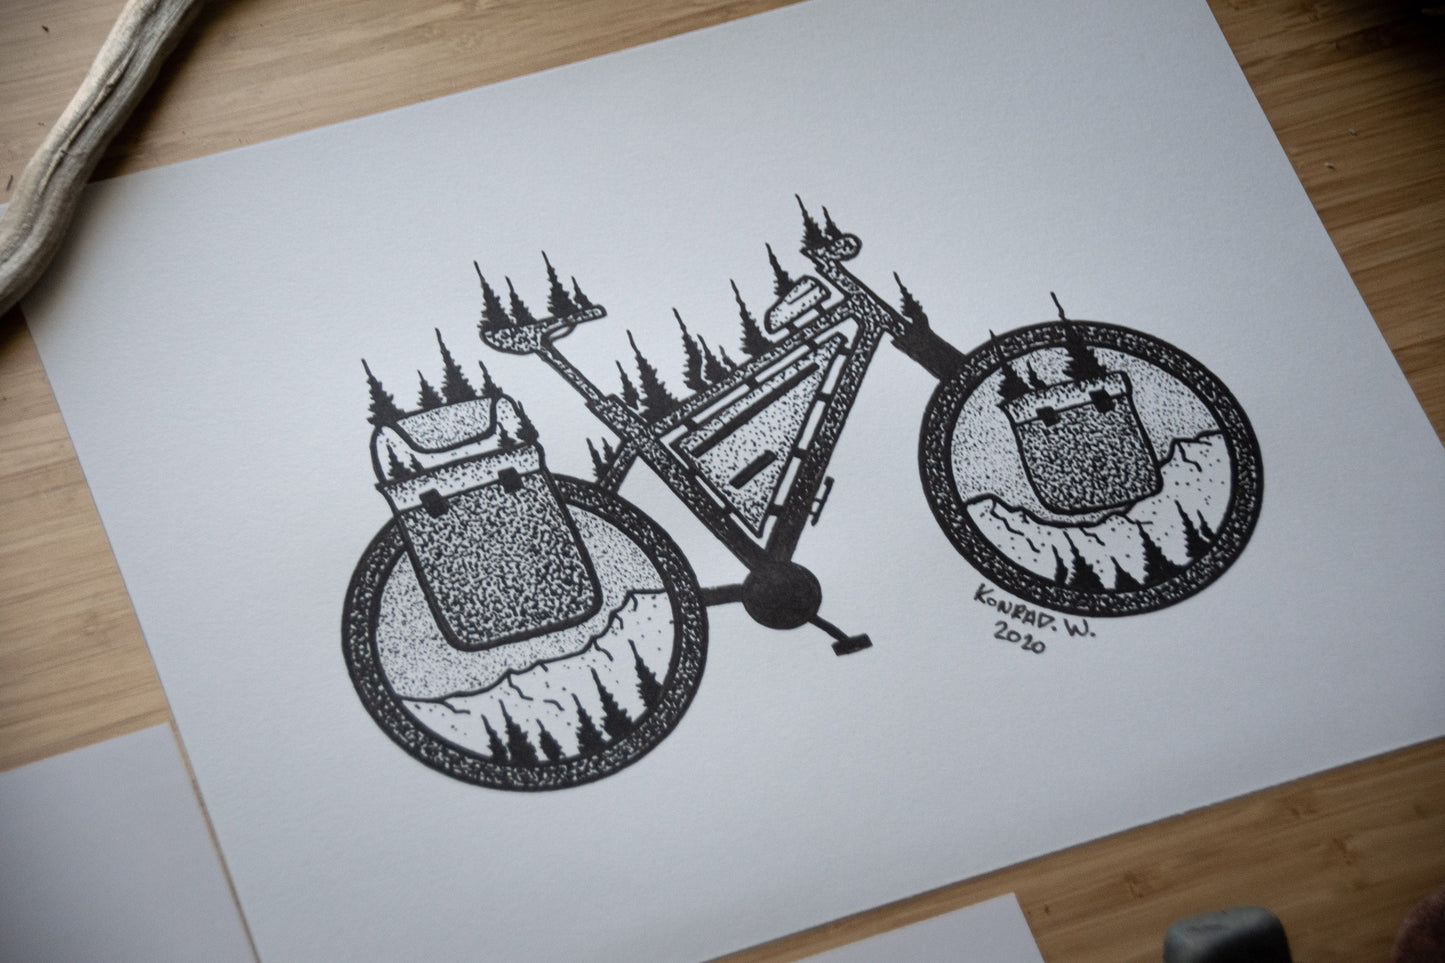 Bike Packing - Pen and Ink PRINT